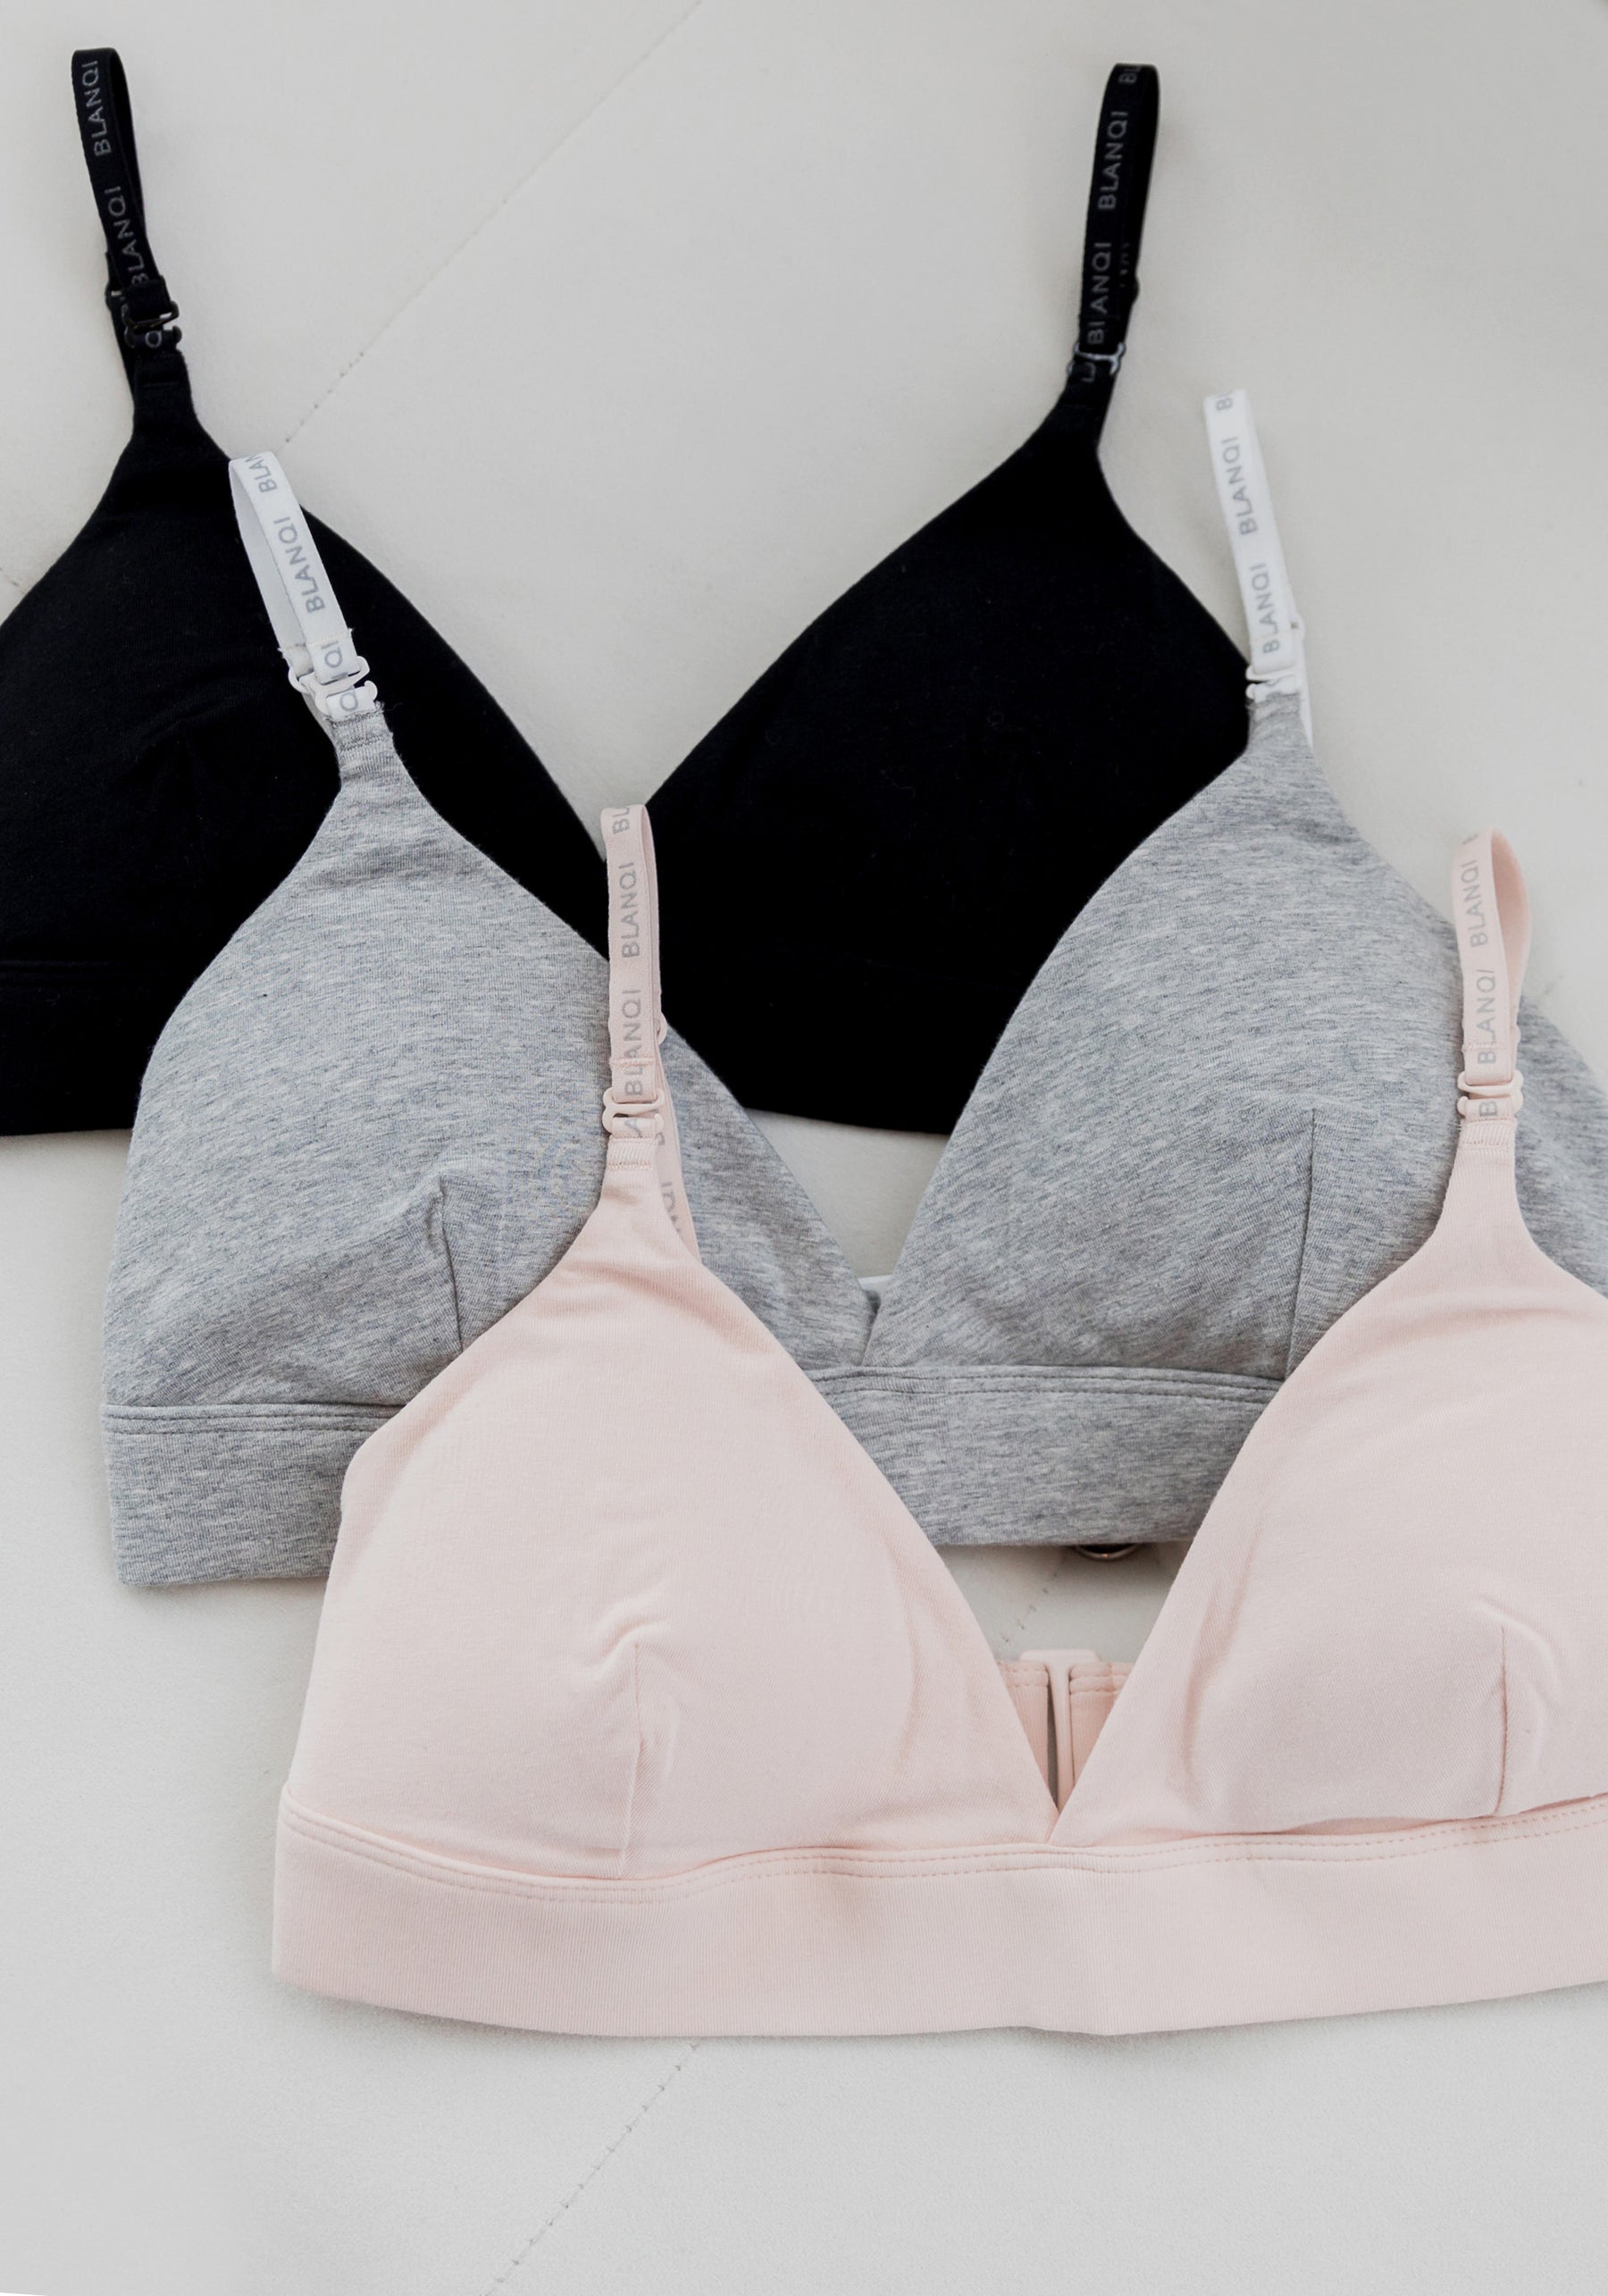 An absolute essential for the IBTC !! @Pepper🌶️ Bras